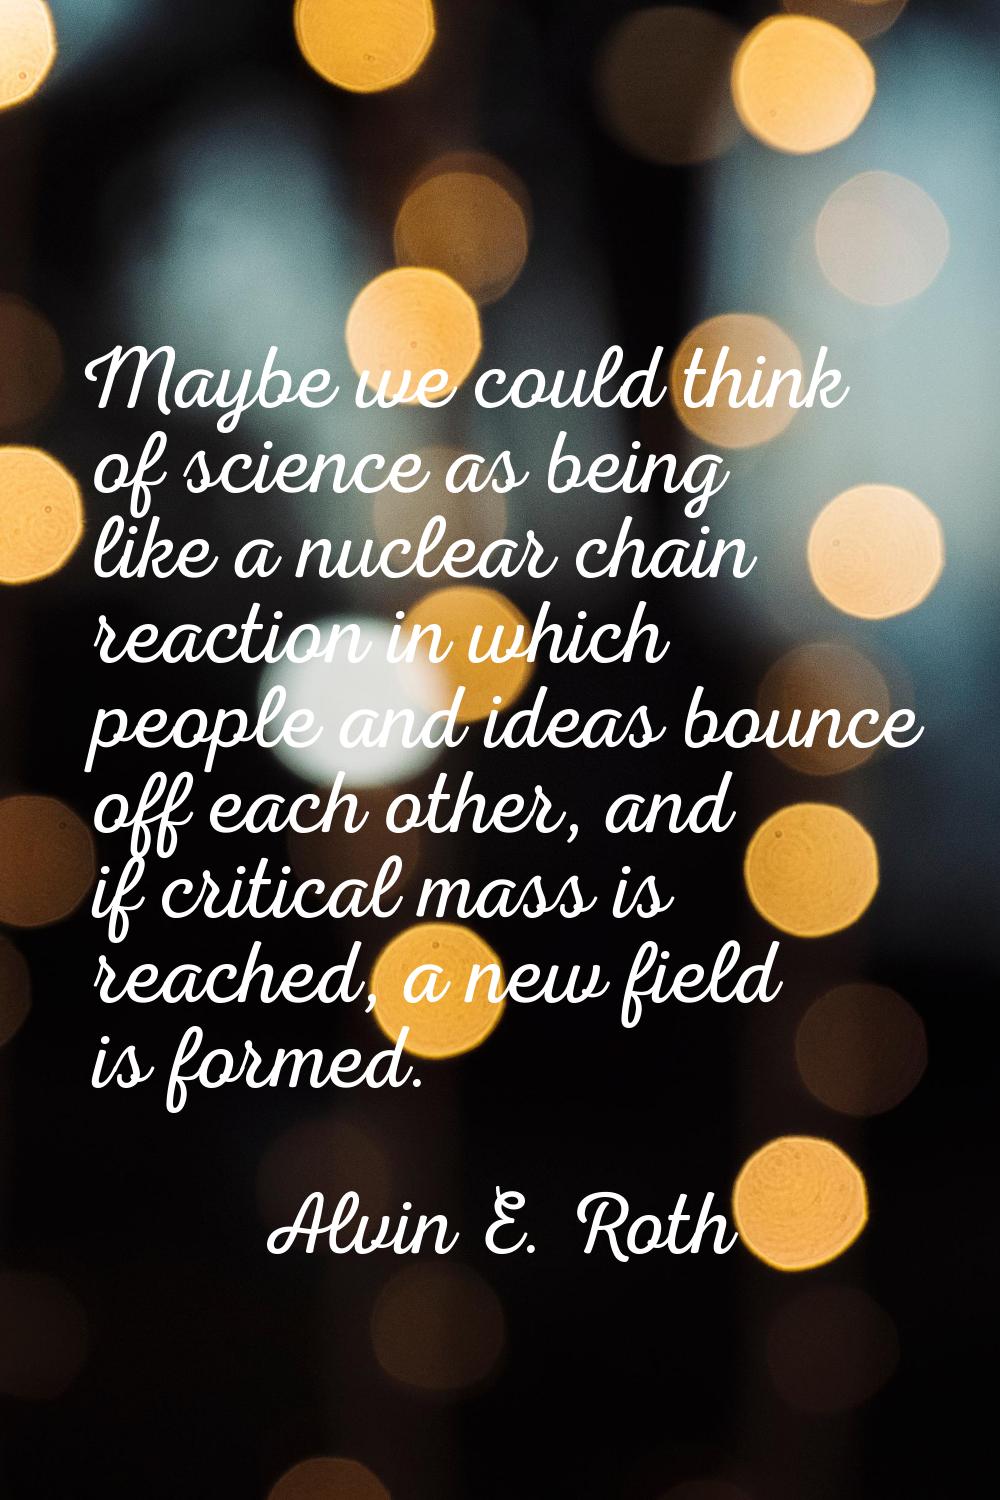 Maybe we could think of science as being like a nuclear chain reaction in which people and ideas bo